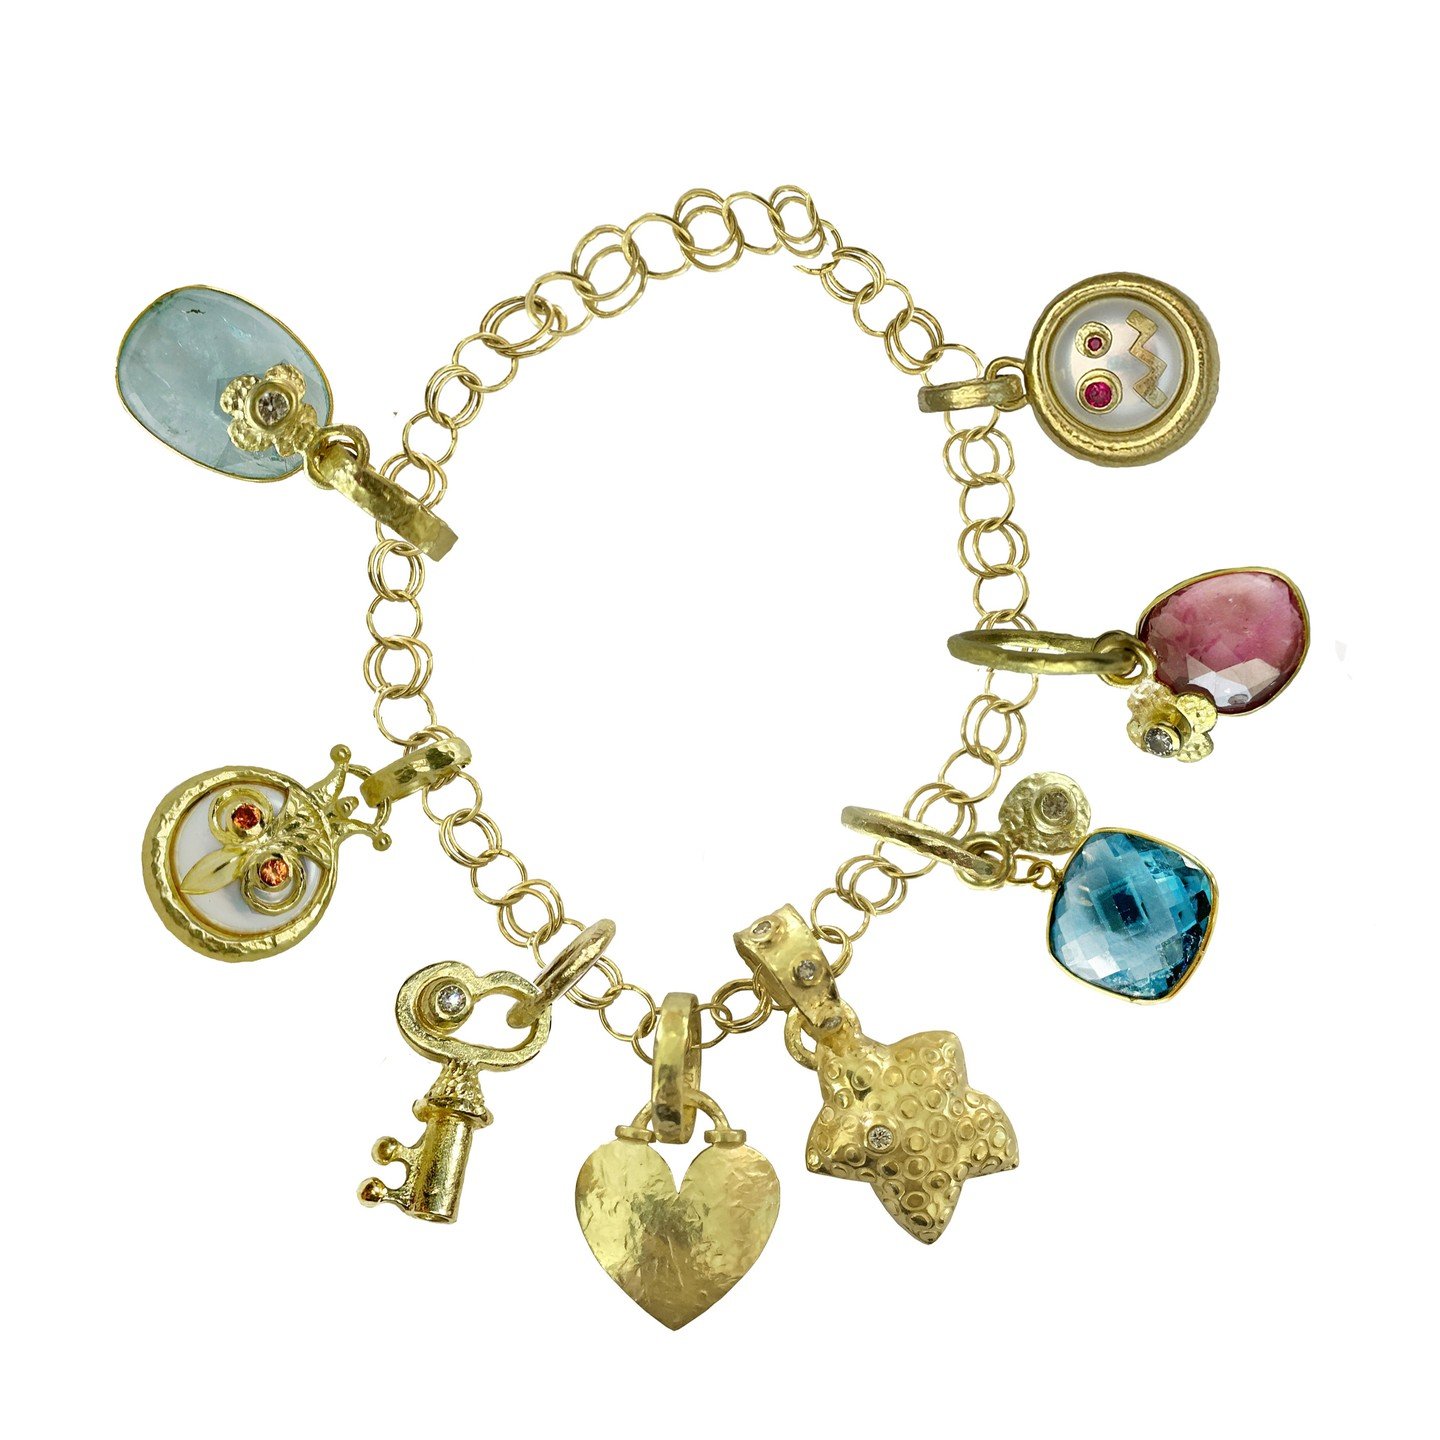 Charm Her Every Day❤️
Mother's Day is Sunday May 12th! 
Now Open Tuesday-Sunday from 10am to 5pm

#18K #charmbracelets #charm #aquamarine #18Kgold #goldkey #heart #goldheart #key #star #goldstar #pinktourmaline #bluetopaz #pearls #diamonds #bespoke #